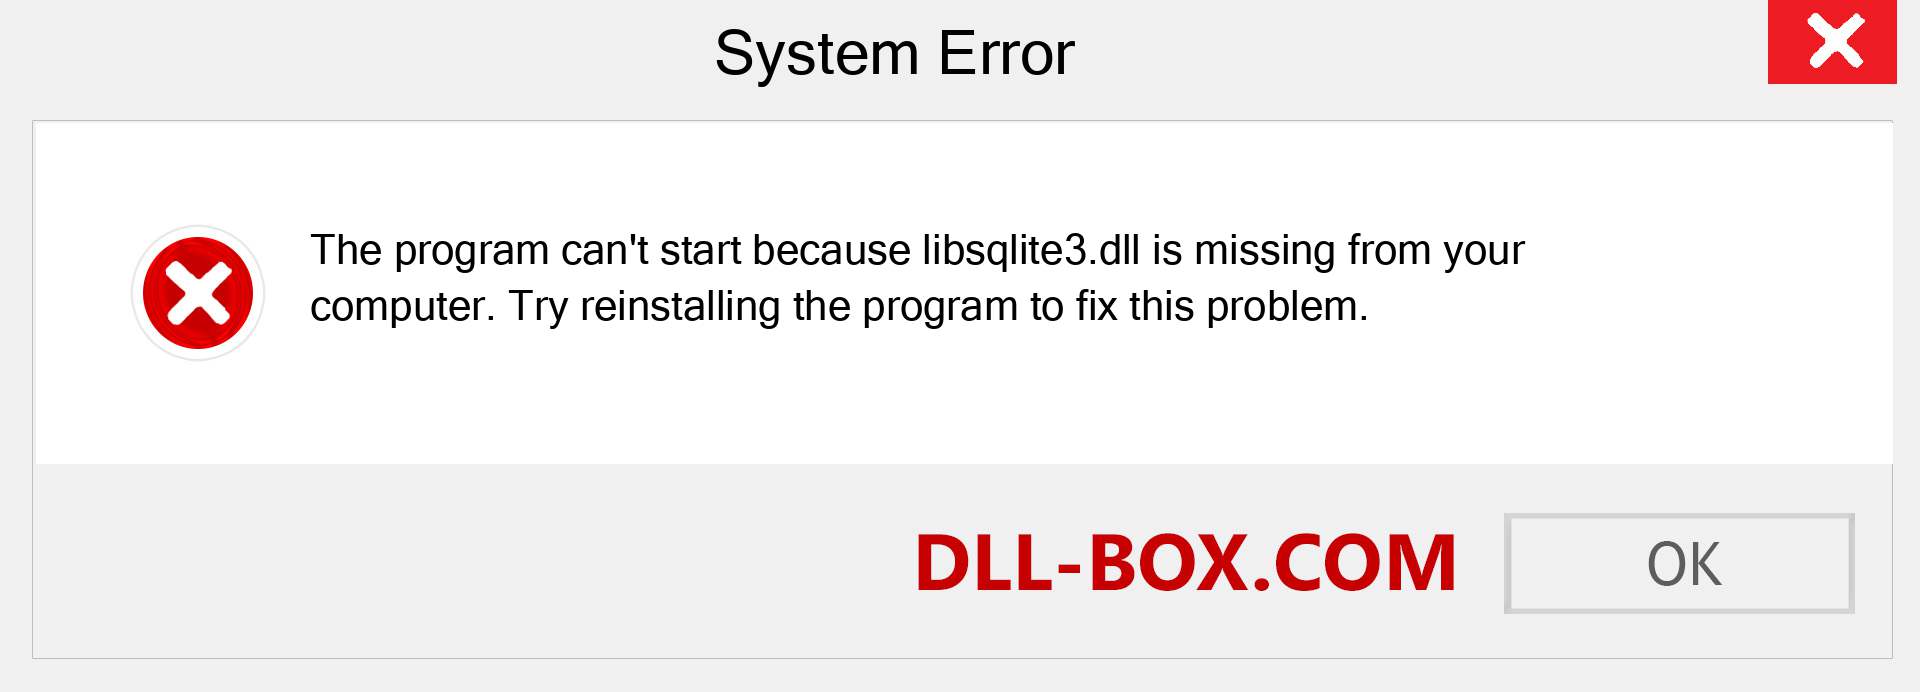  libsqlite3.dll file is missing?. Download for Windows 7, 8, 10 - Fix  libsqlite3 dll Missing Error on Windows, photos, images